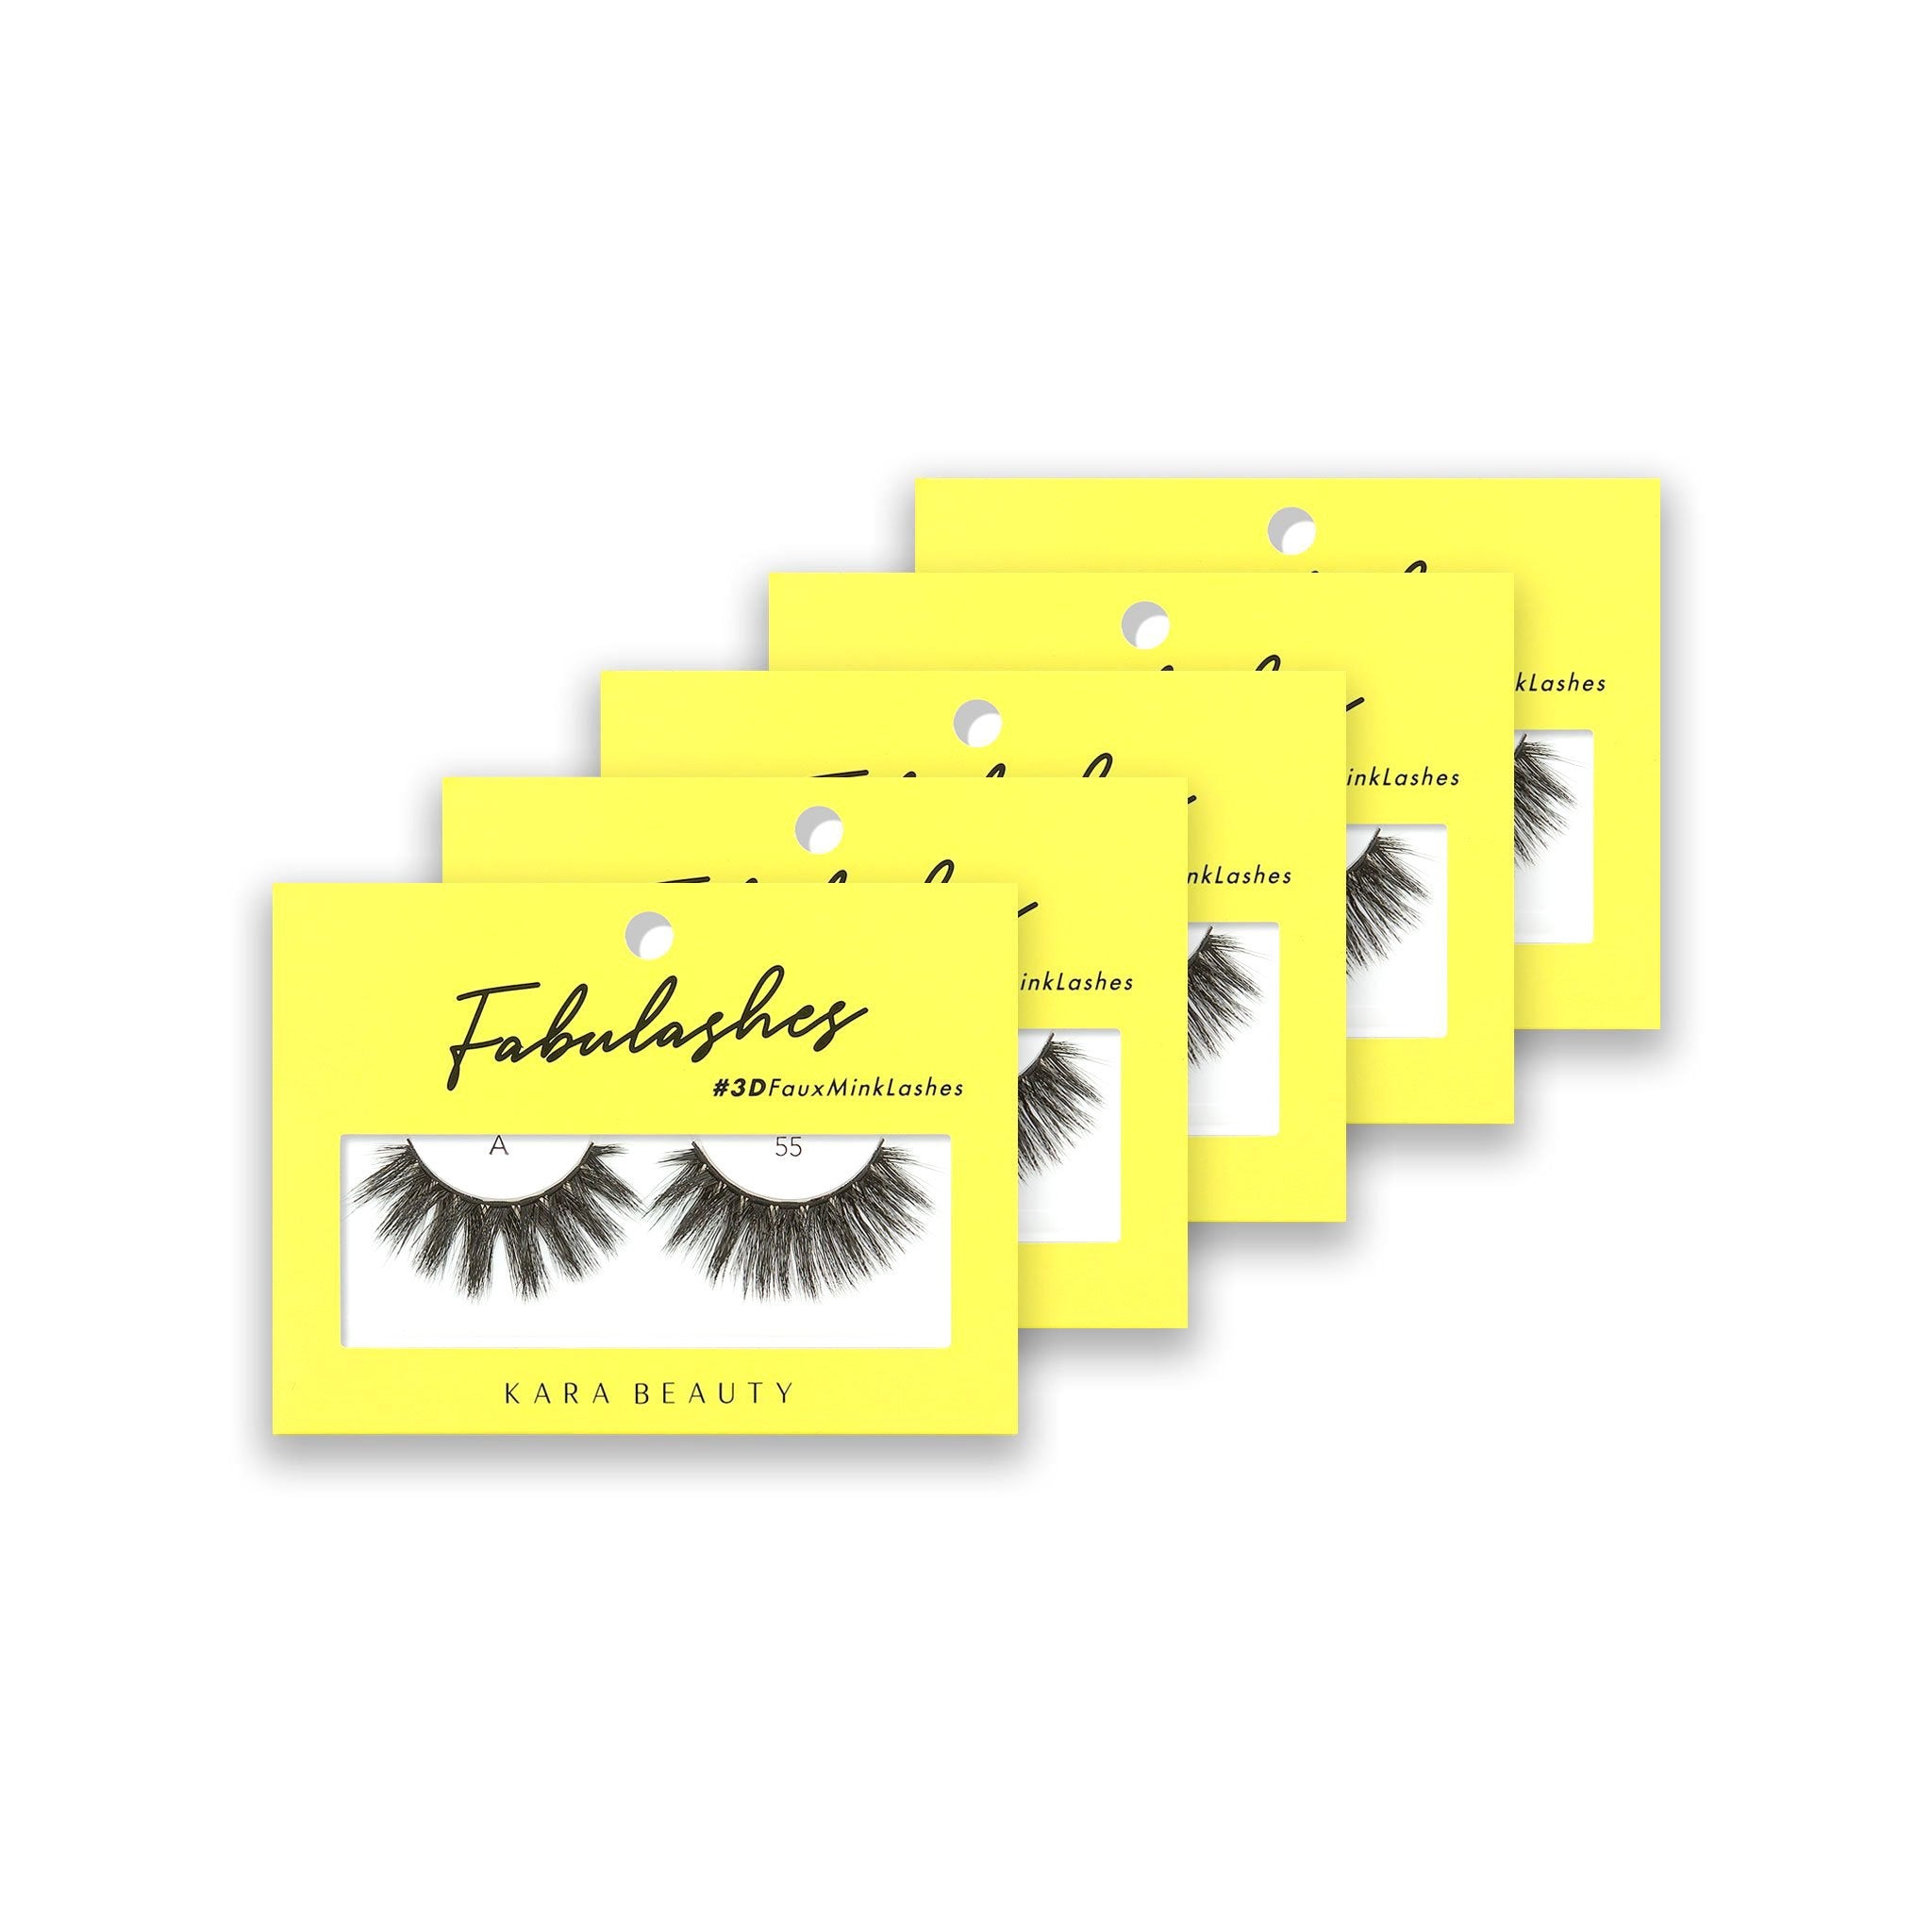 Style A55 Fabulashes 3D faux mink strip eyelashes 5 pack